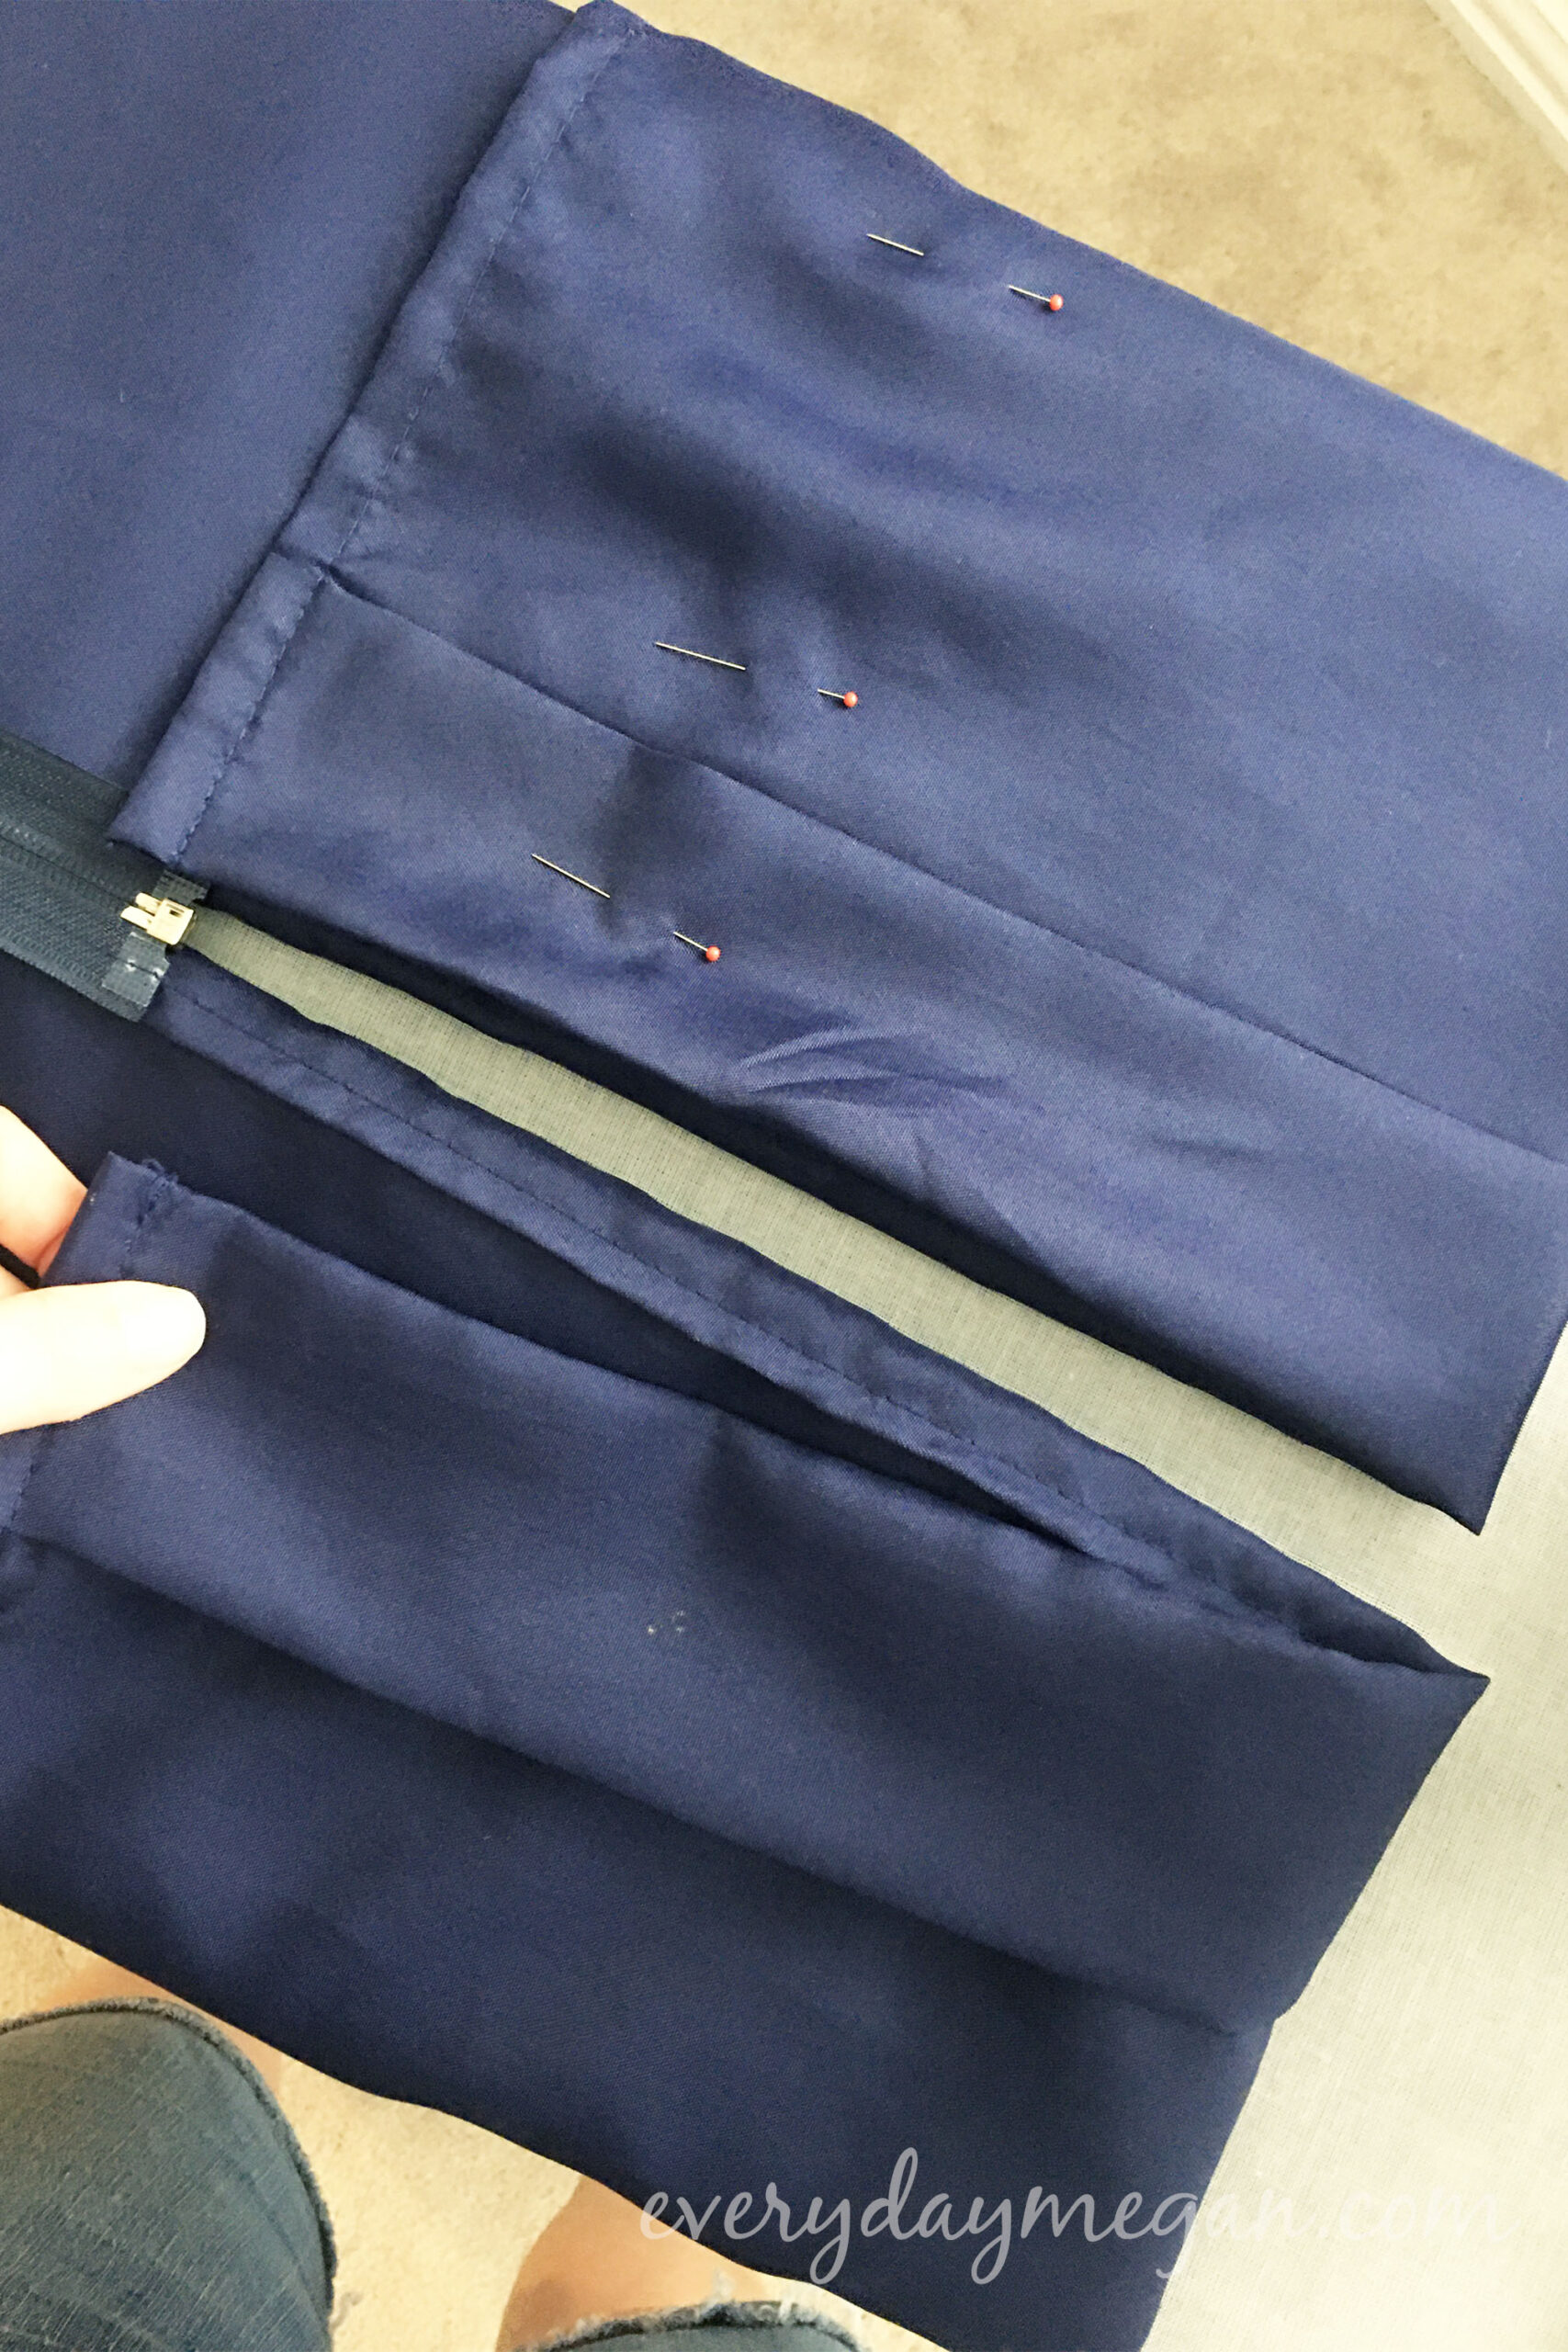 Are you looking for a simple solution to hem a graduation gown? Let me show you how to easily hem a graduation gown without a sewing machine.